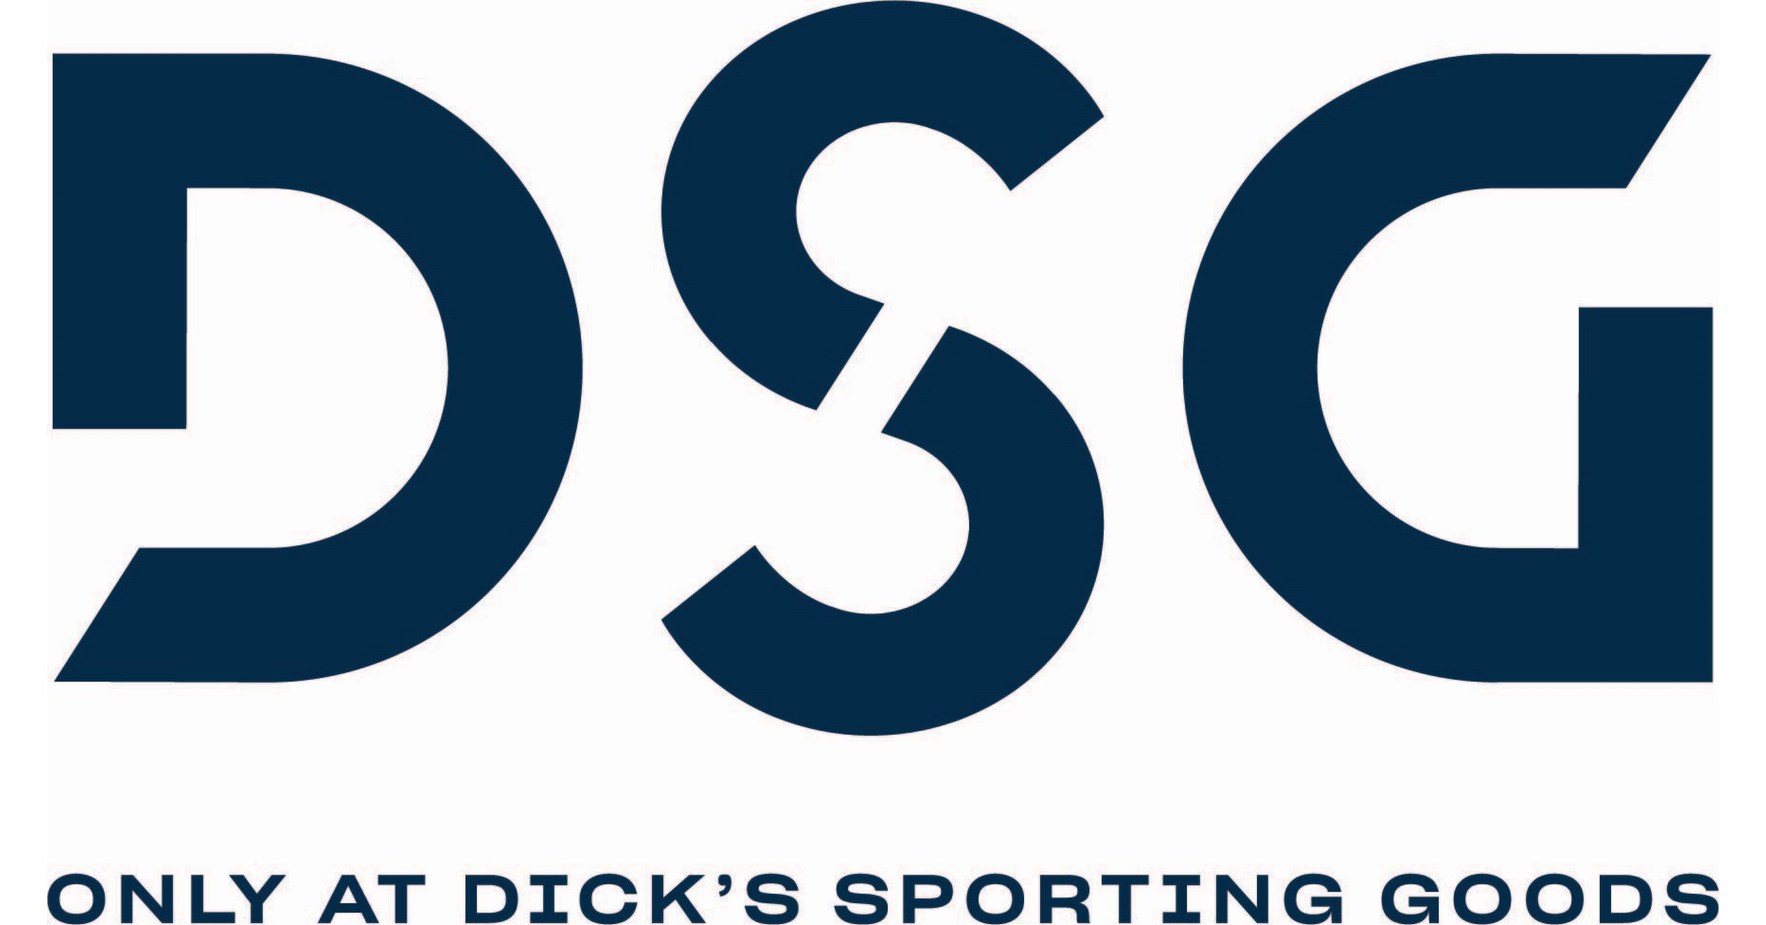 DICK'S Sporting Goods - THE CALIA COLLECTIVE IS THE NEXT STEP IN